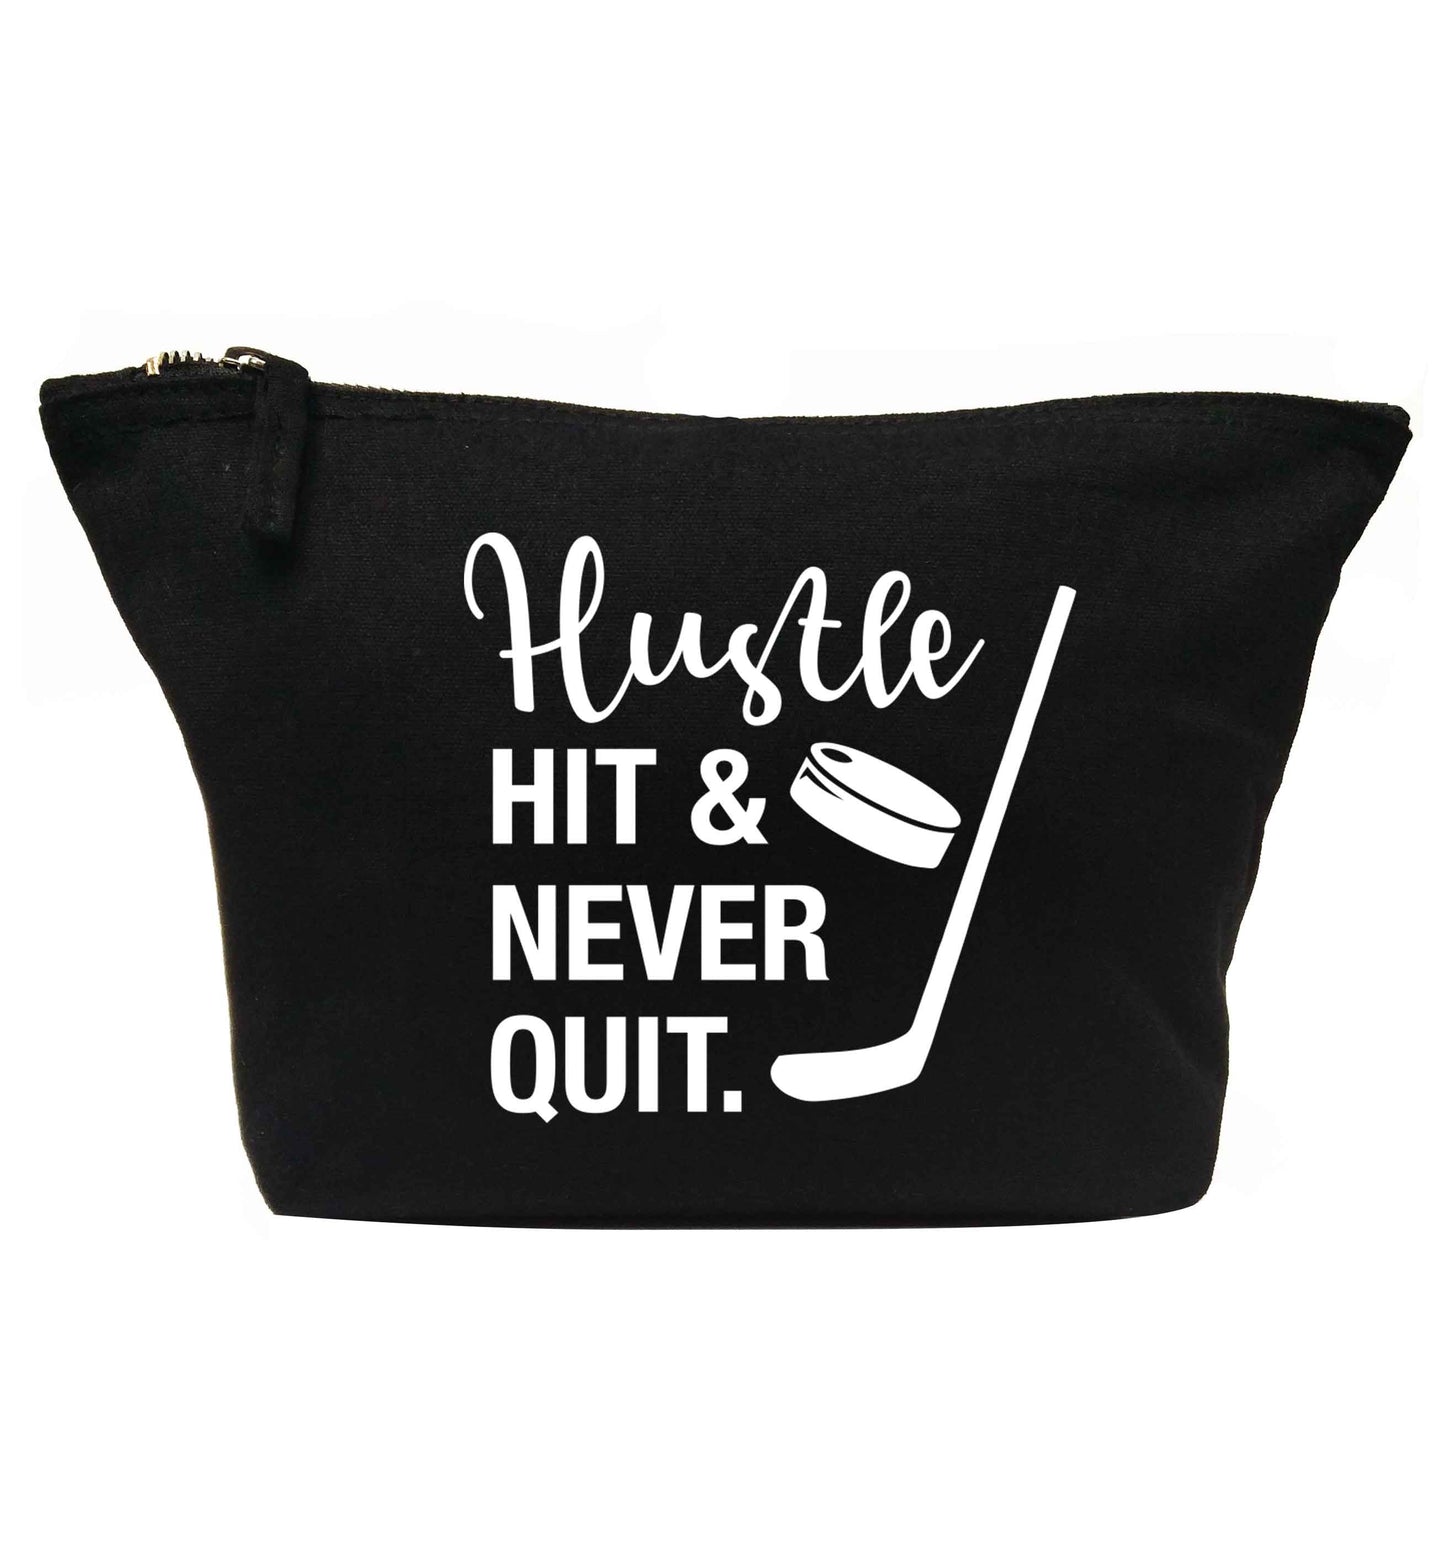 Hustle hit and never quit | makeup / wash bag